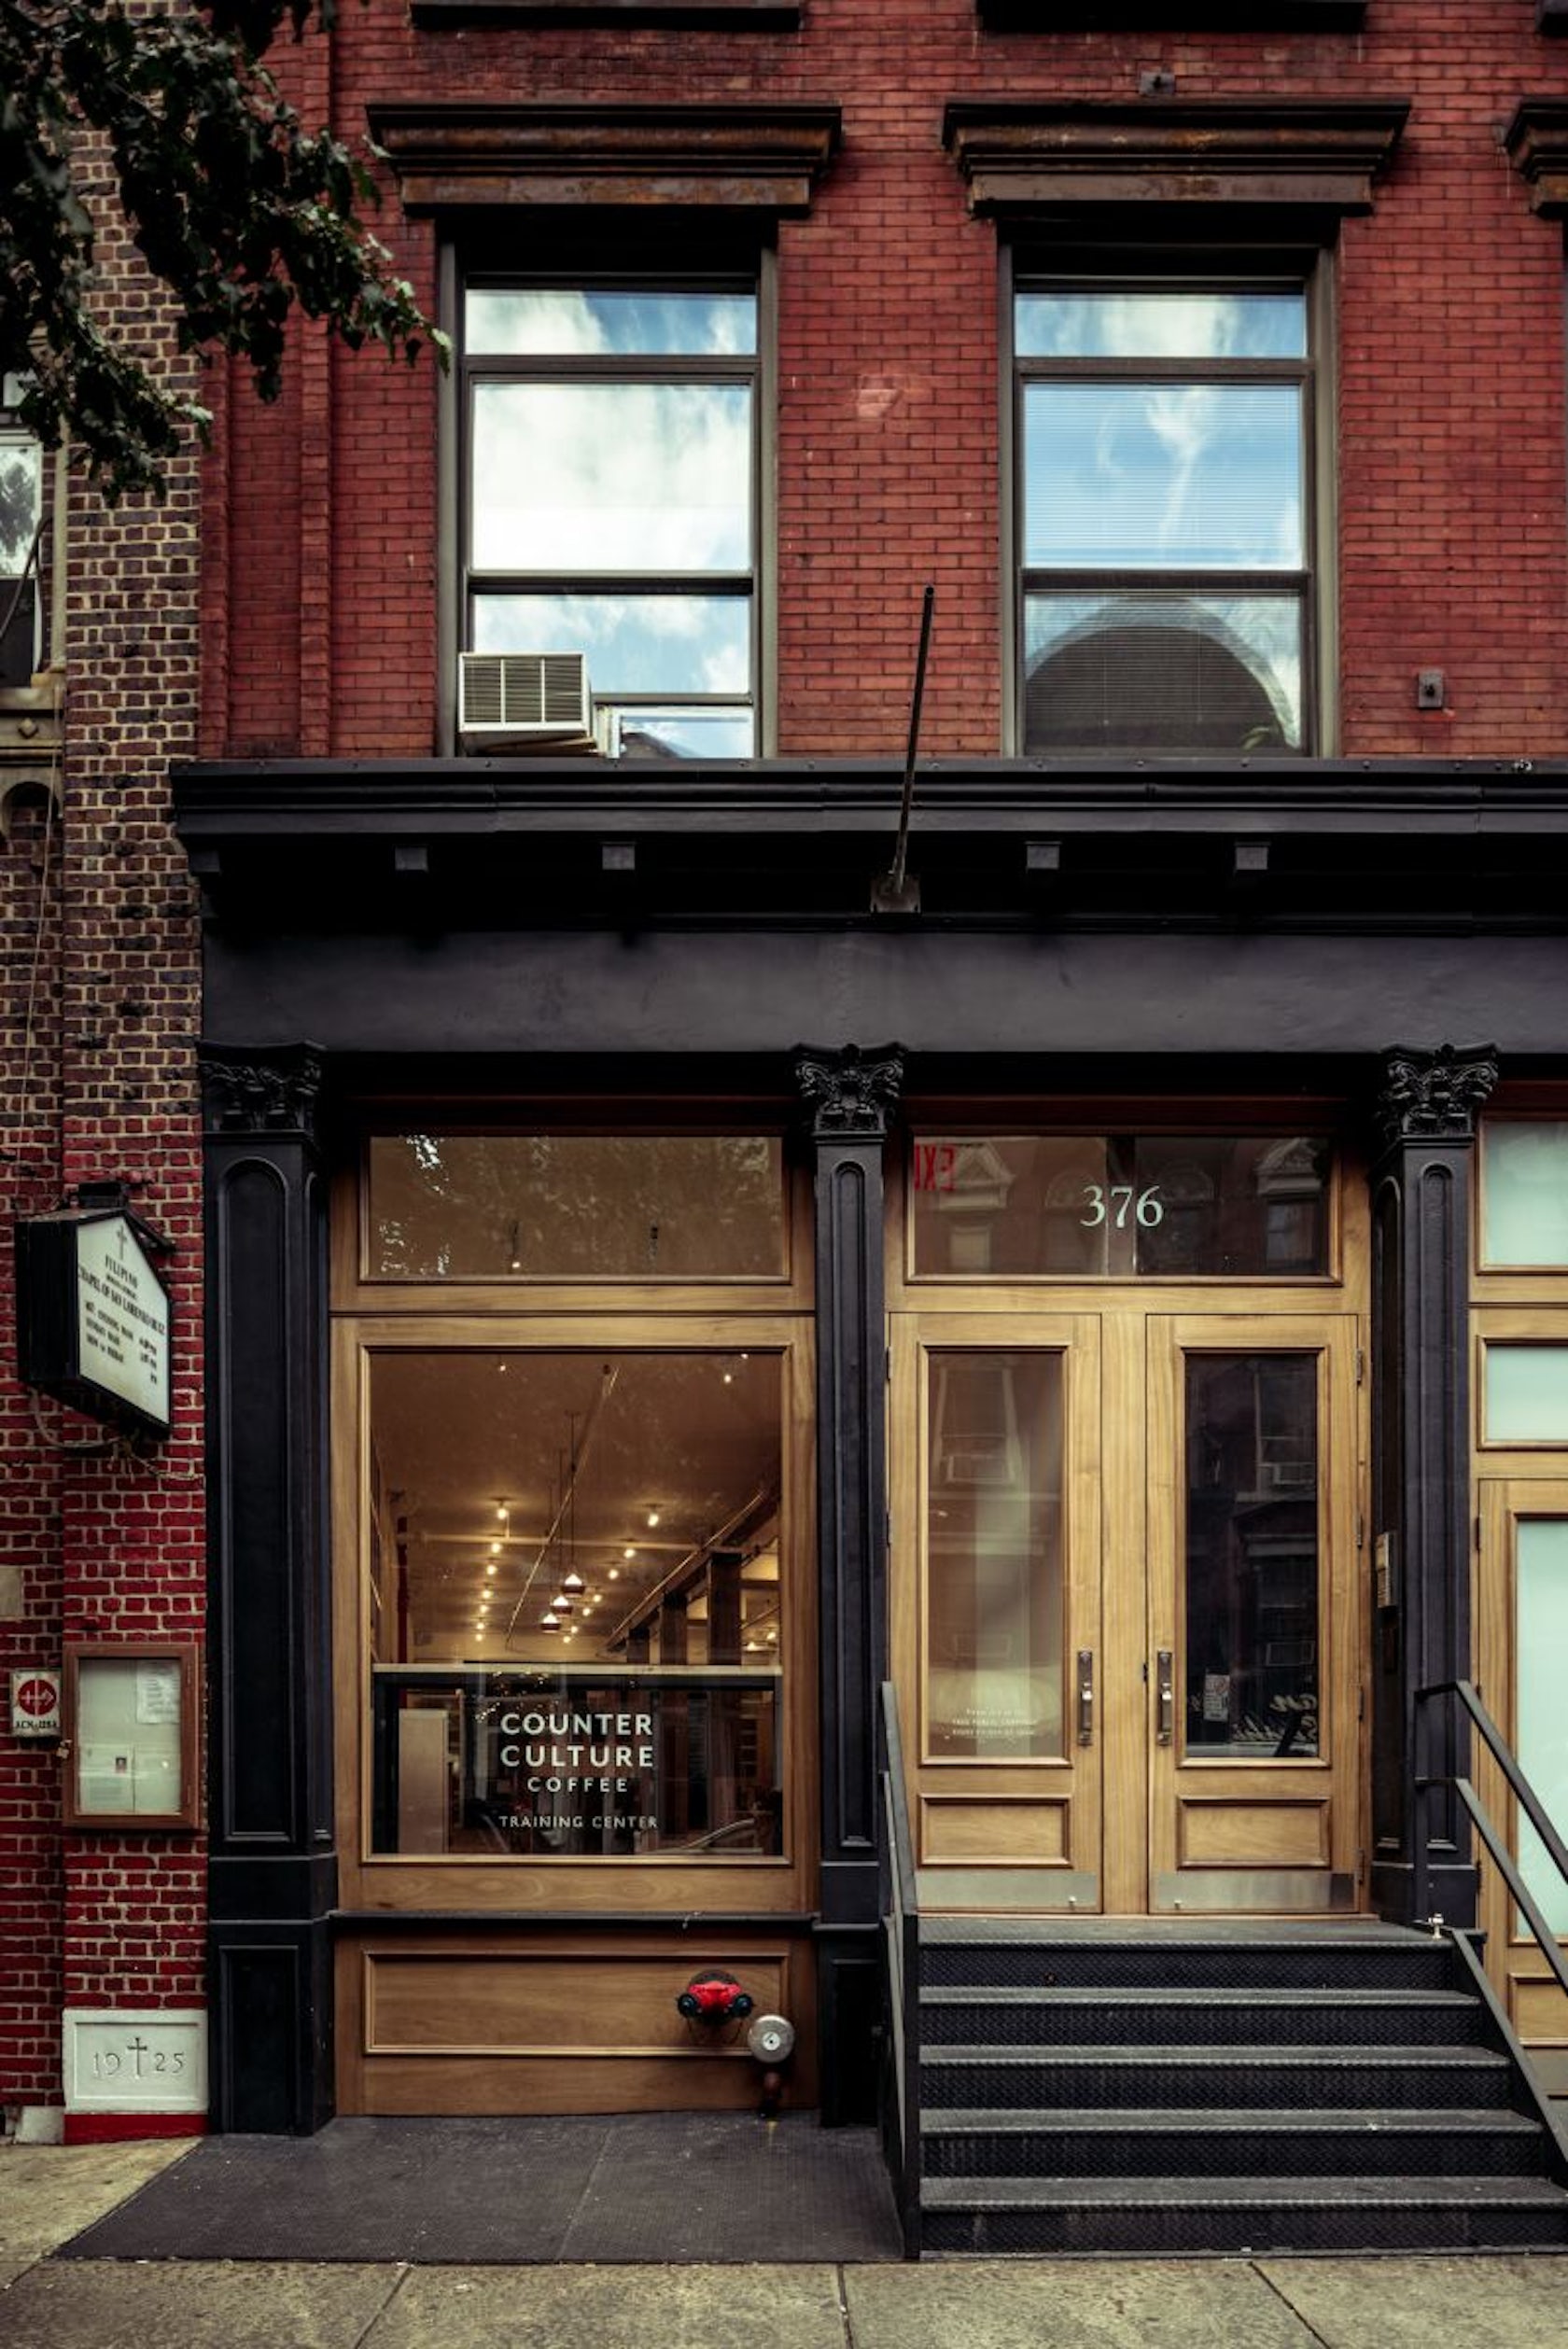 Counter Culture Coffee Training Center NYC - Architizer